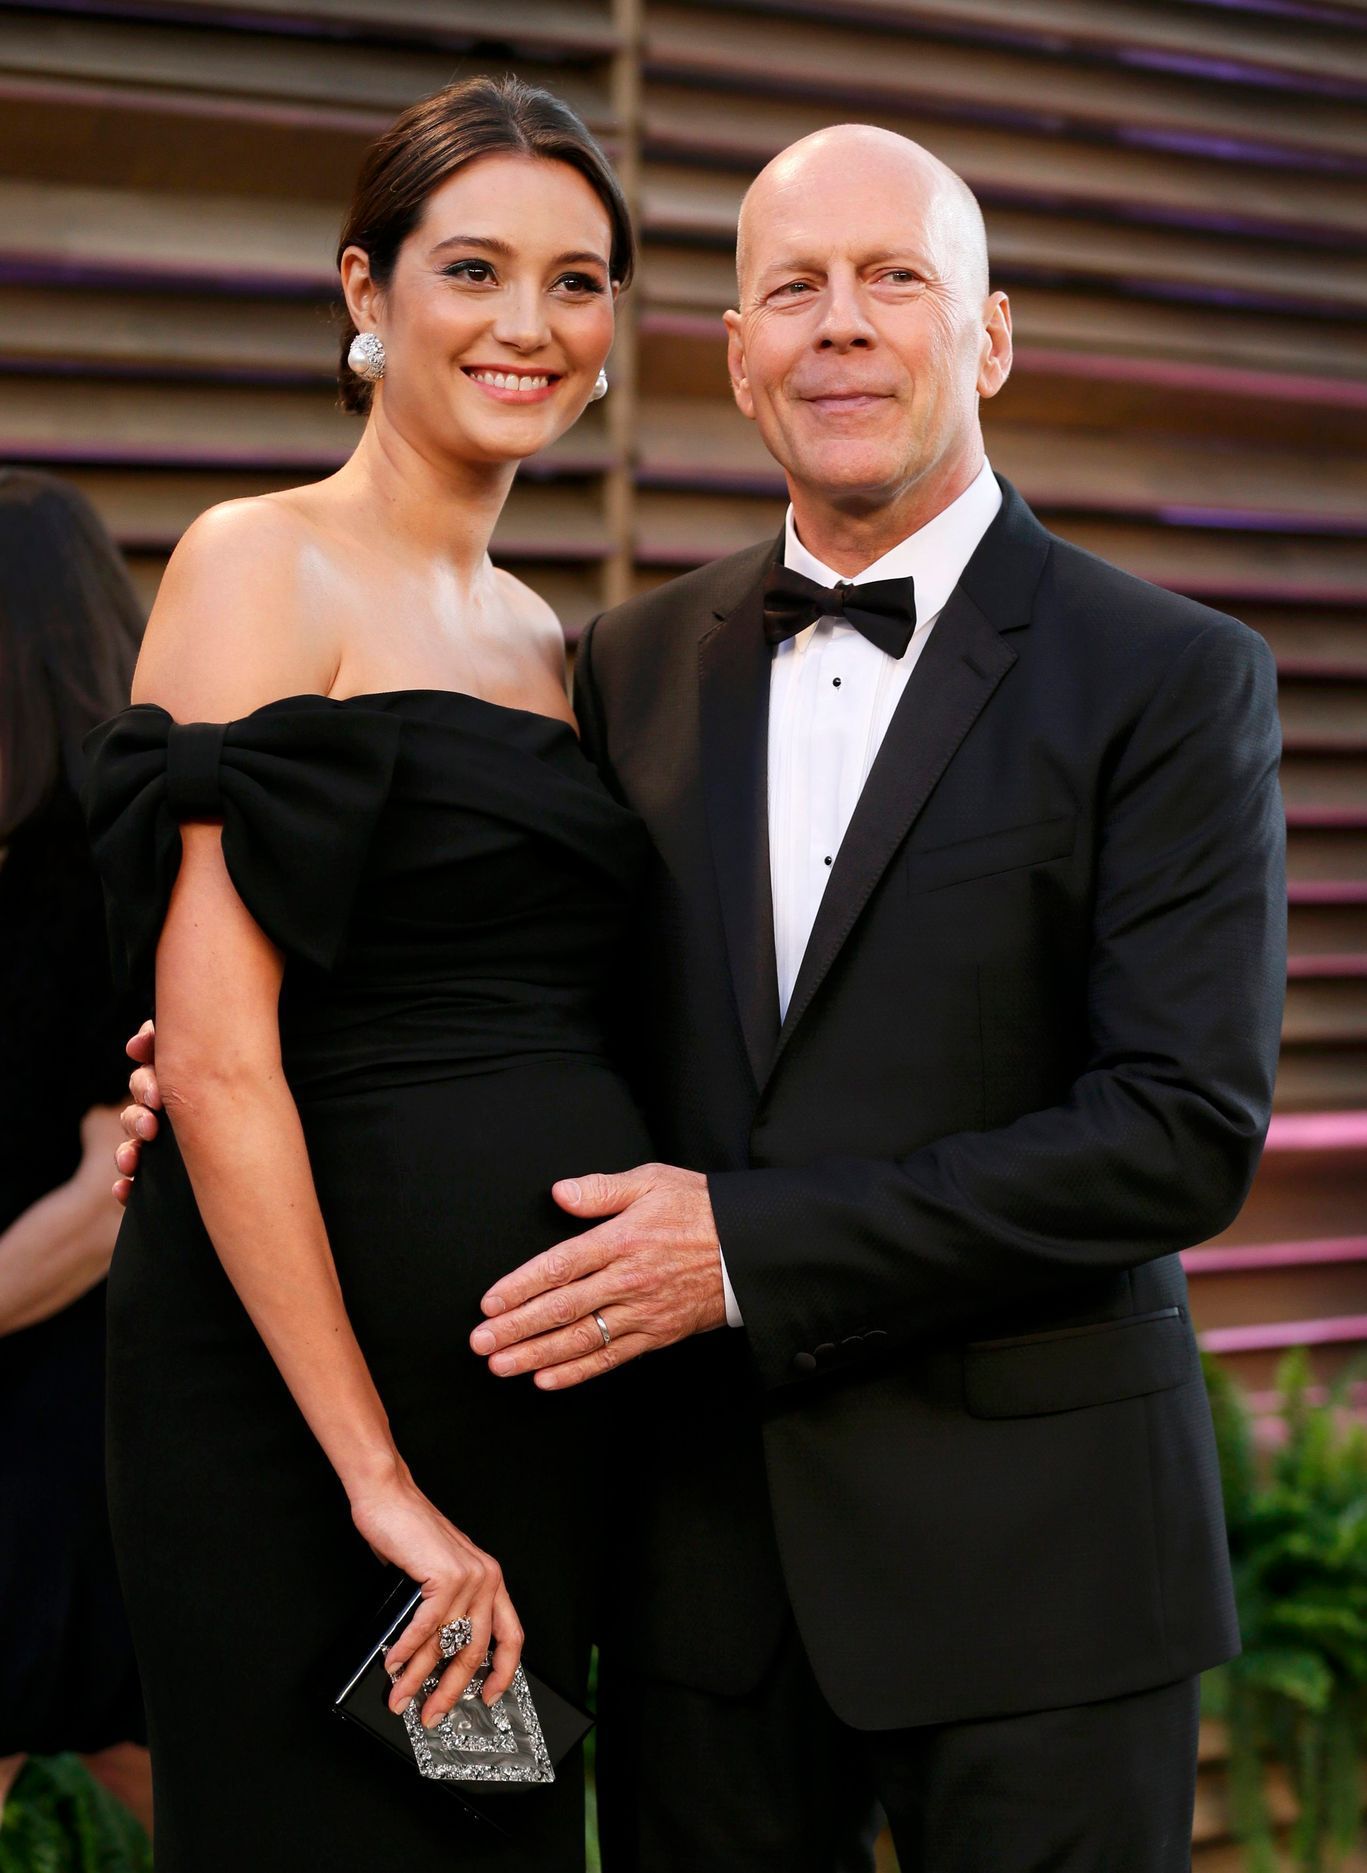 Actor Bruce Willis and his wife Emma Heming arrive at the 2014 Vanity Fair Oscars Party in West Hollywood